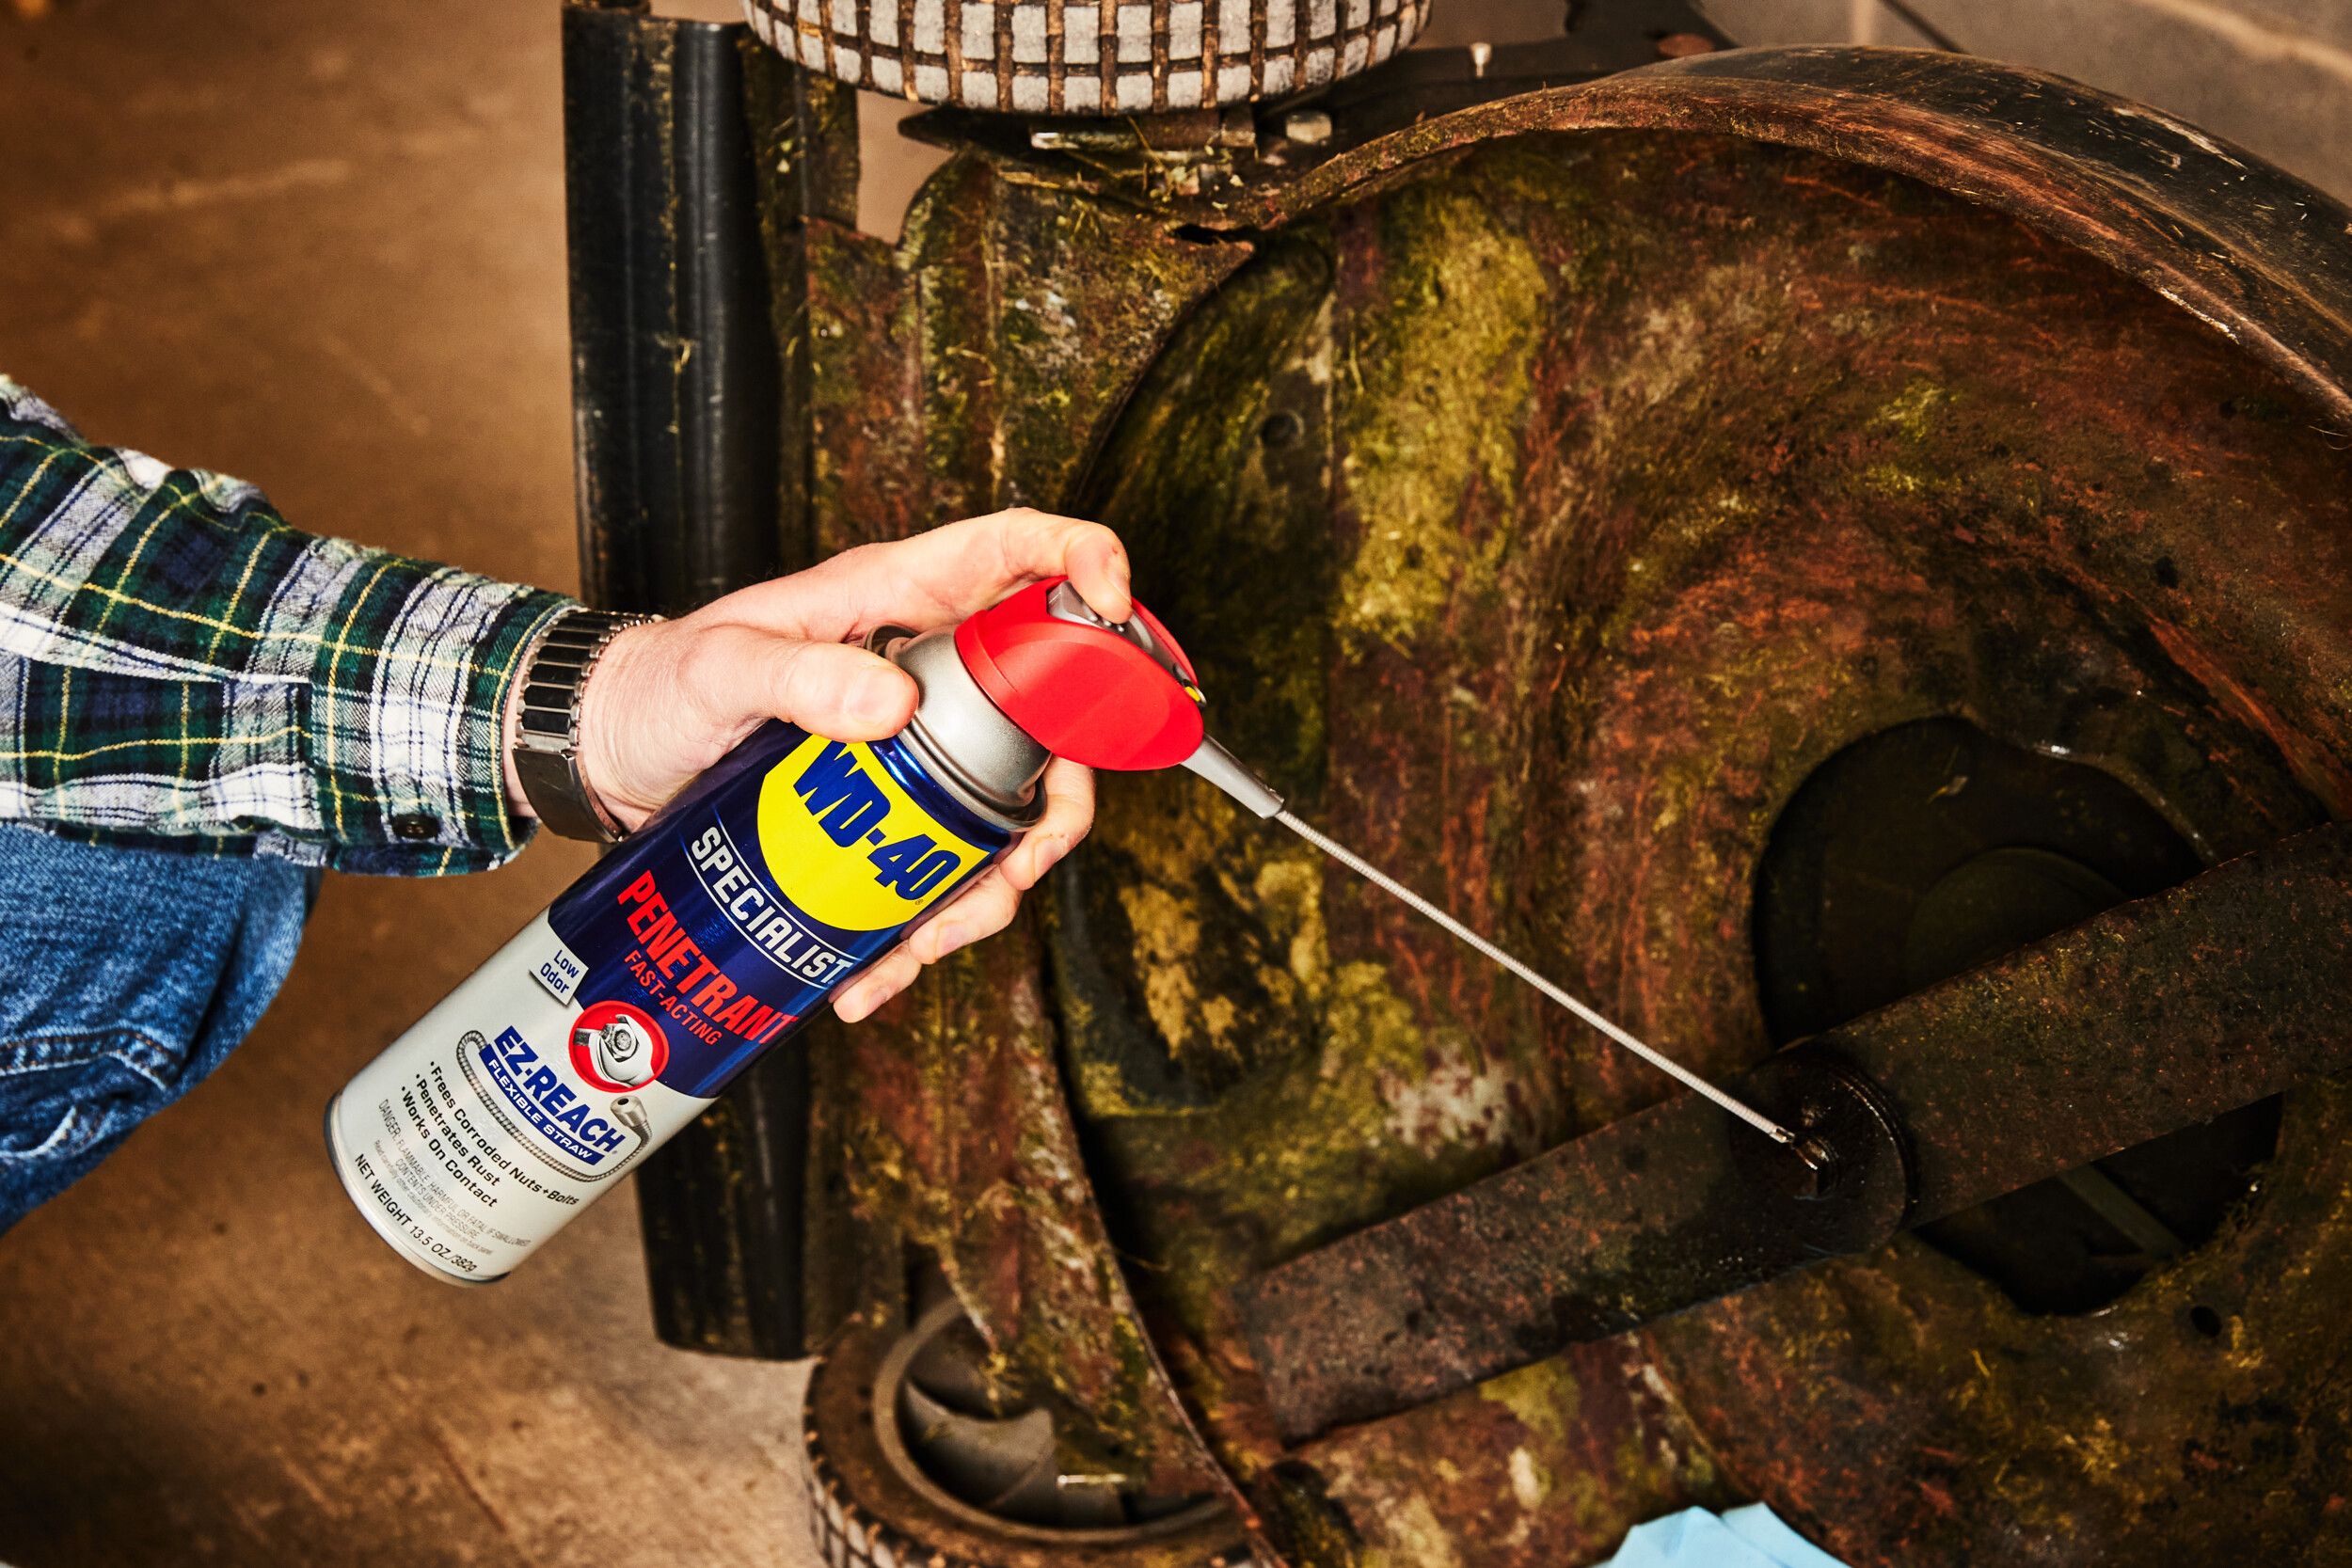 WD-40 SPECIALIST - Lubricants - Car Fluids & Chemicals - The Home